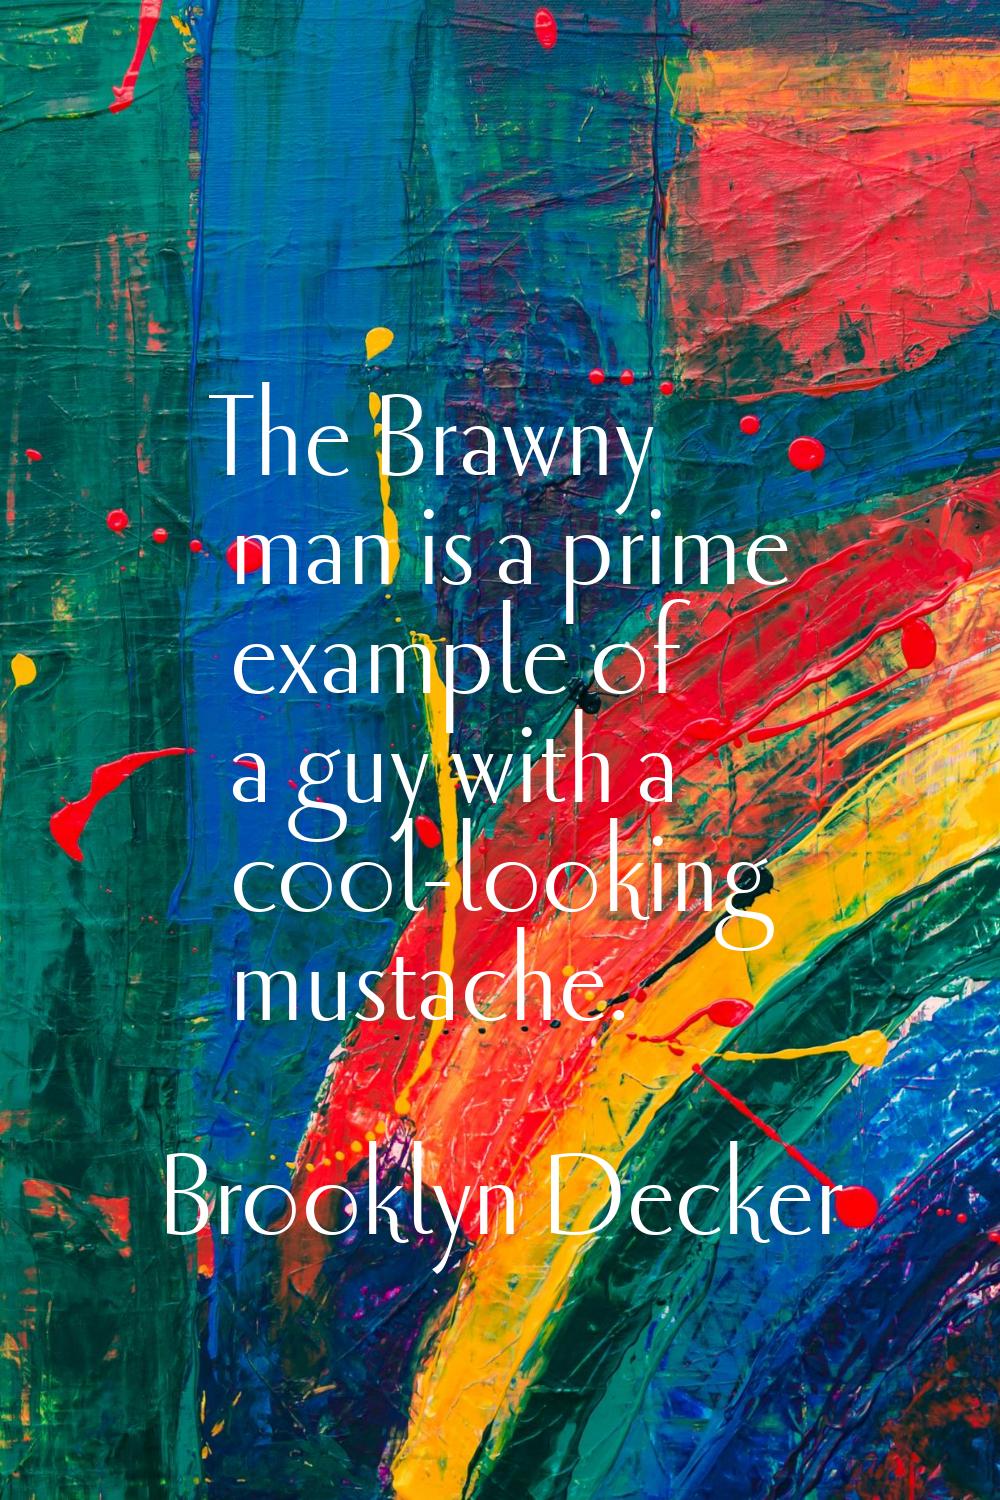 The Brawny man is a prime example of a guy with a cool-looking mustache.